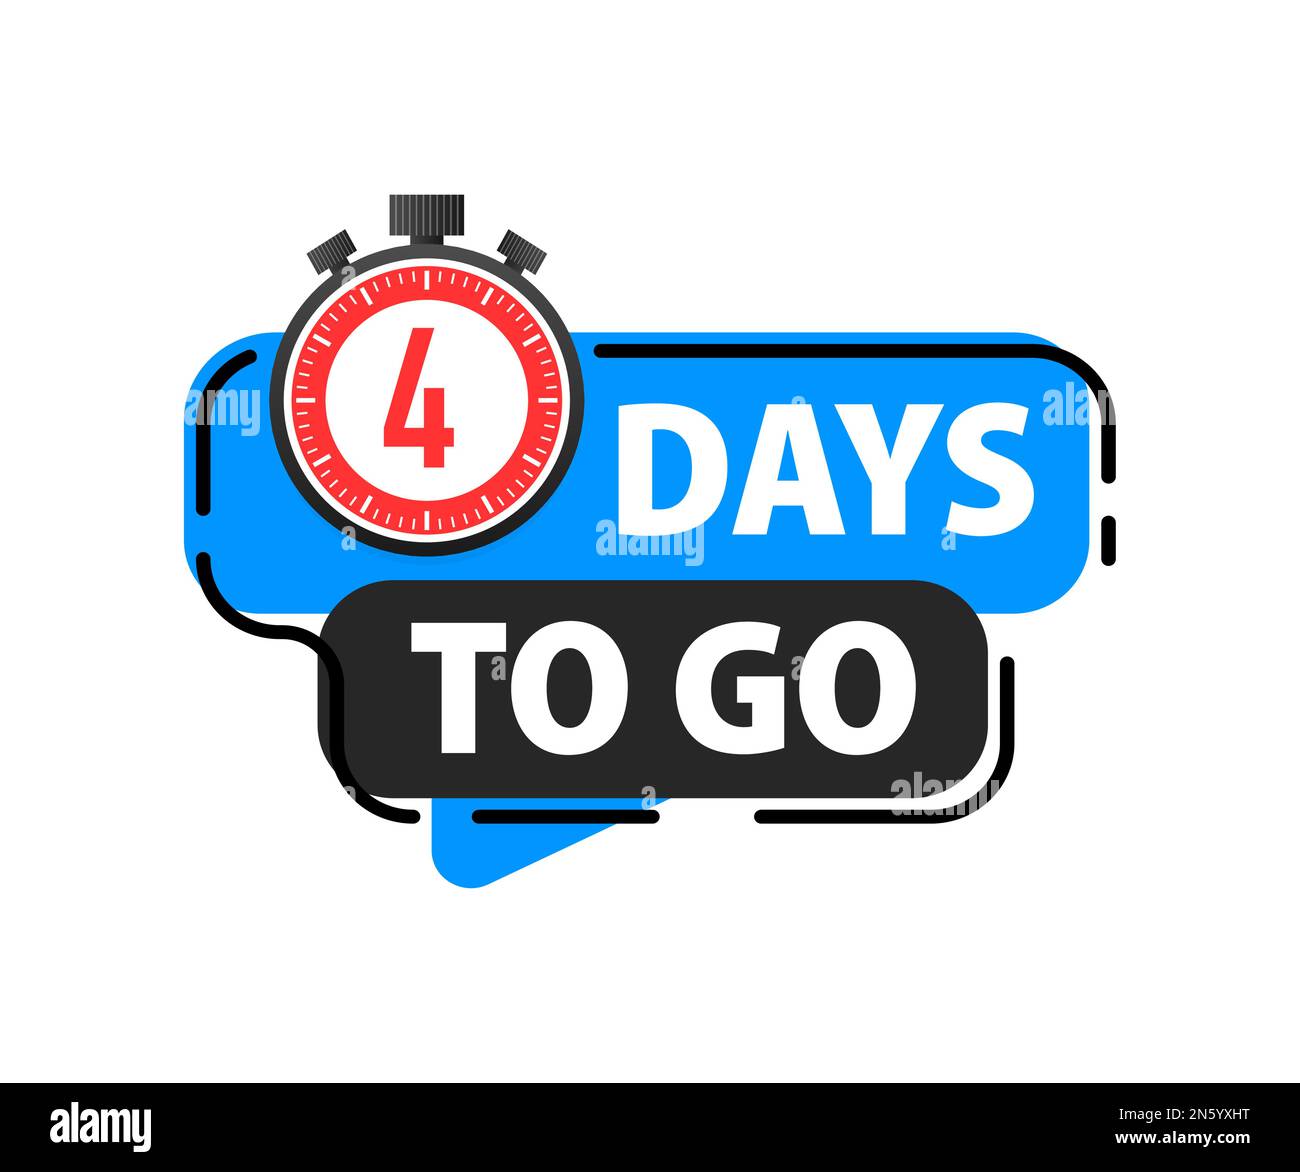 4 days to go Cut Out Stock Images & Pictures - Alamy